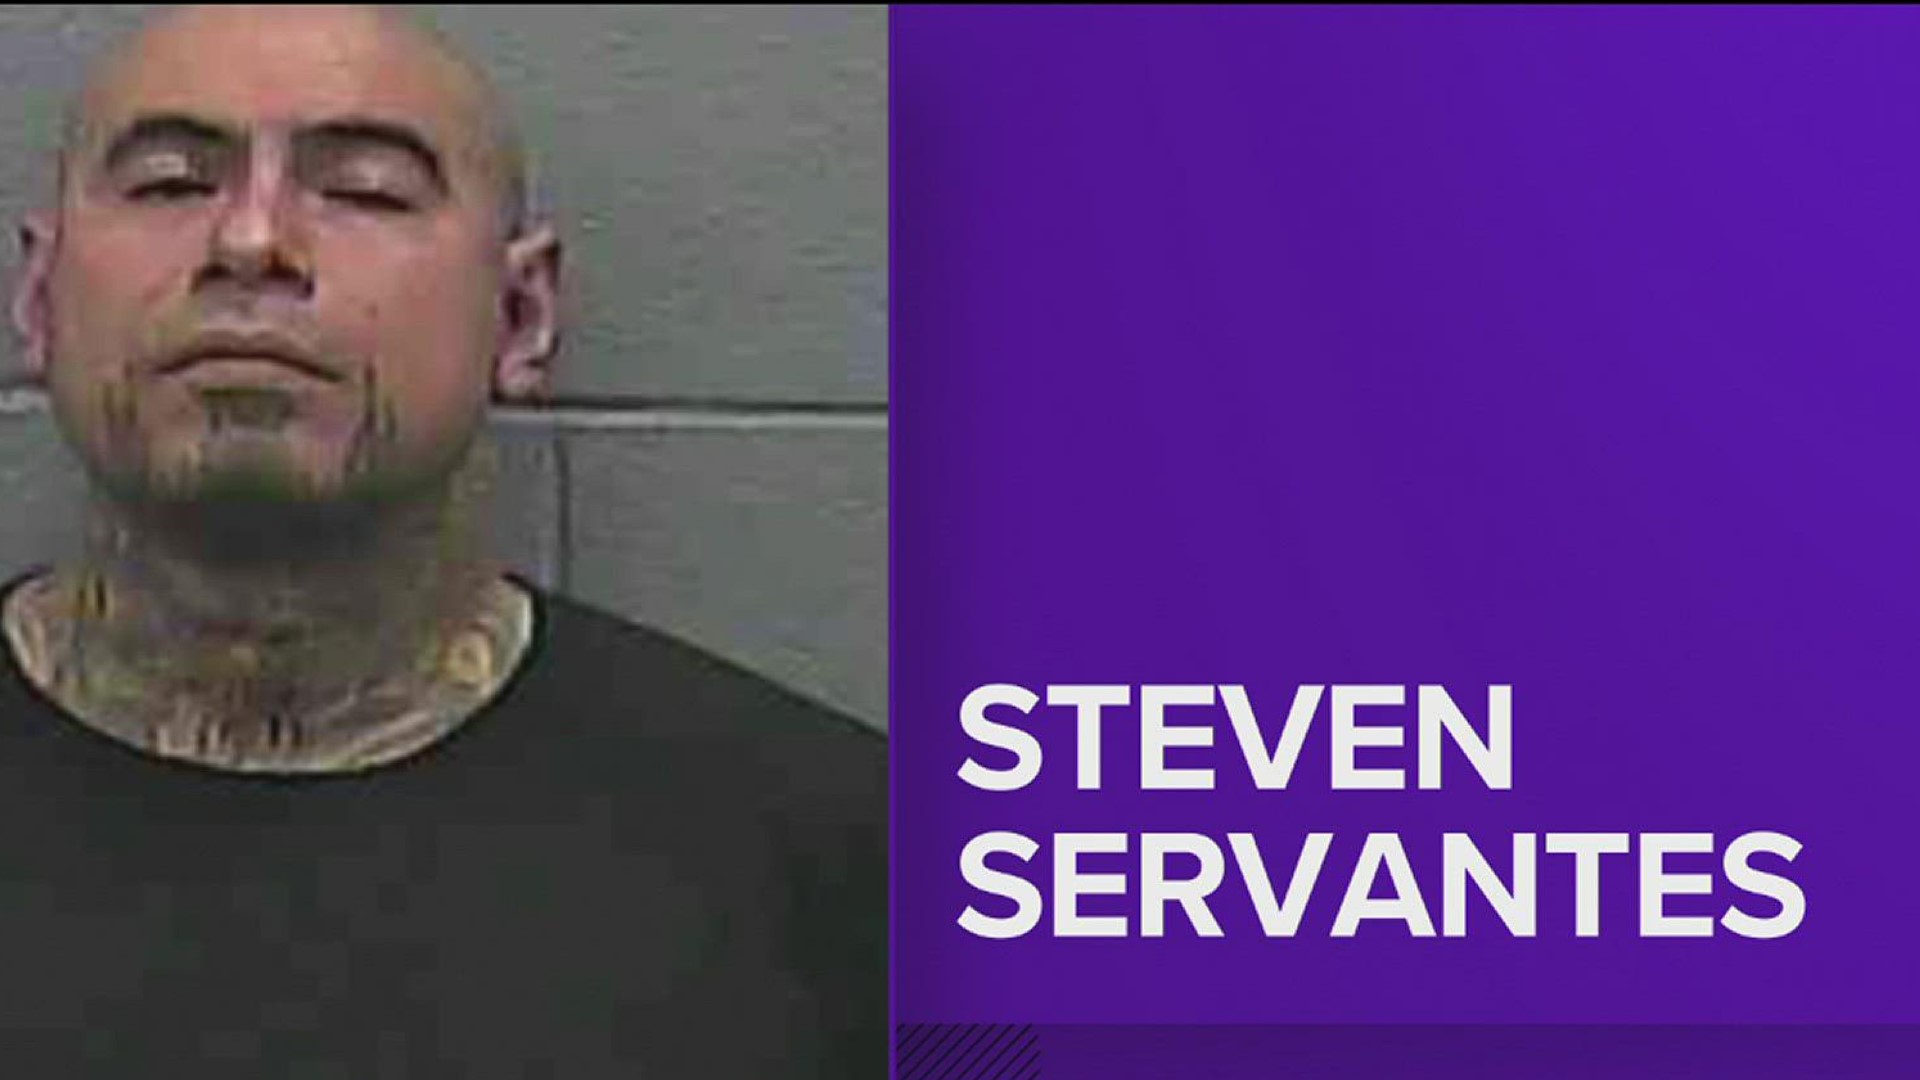 40-year-old Steven Servantes is wanted after running away from an escort during community work.